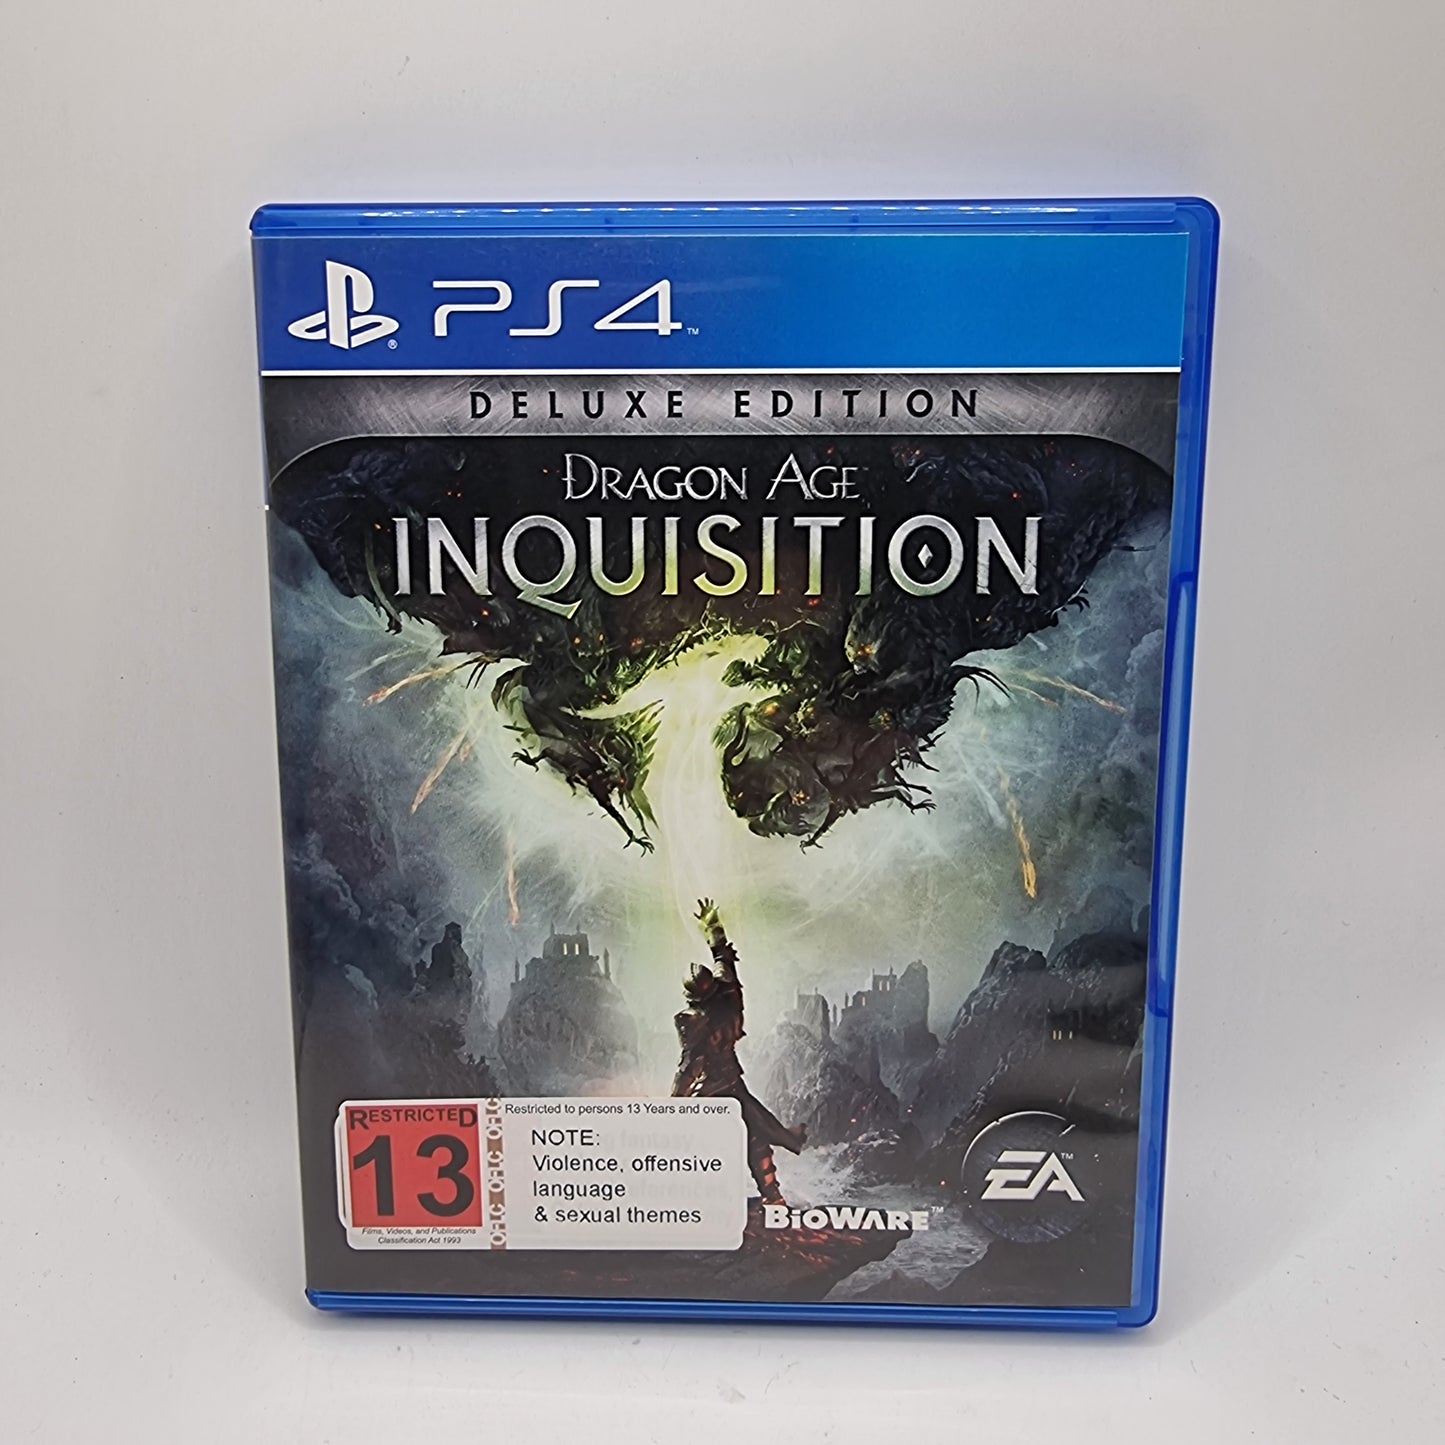 Dragon Age Inquisition Deluxe Edition PS4 Game